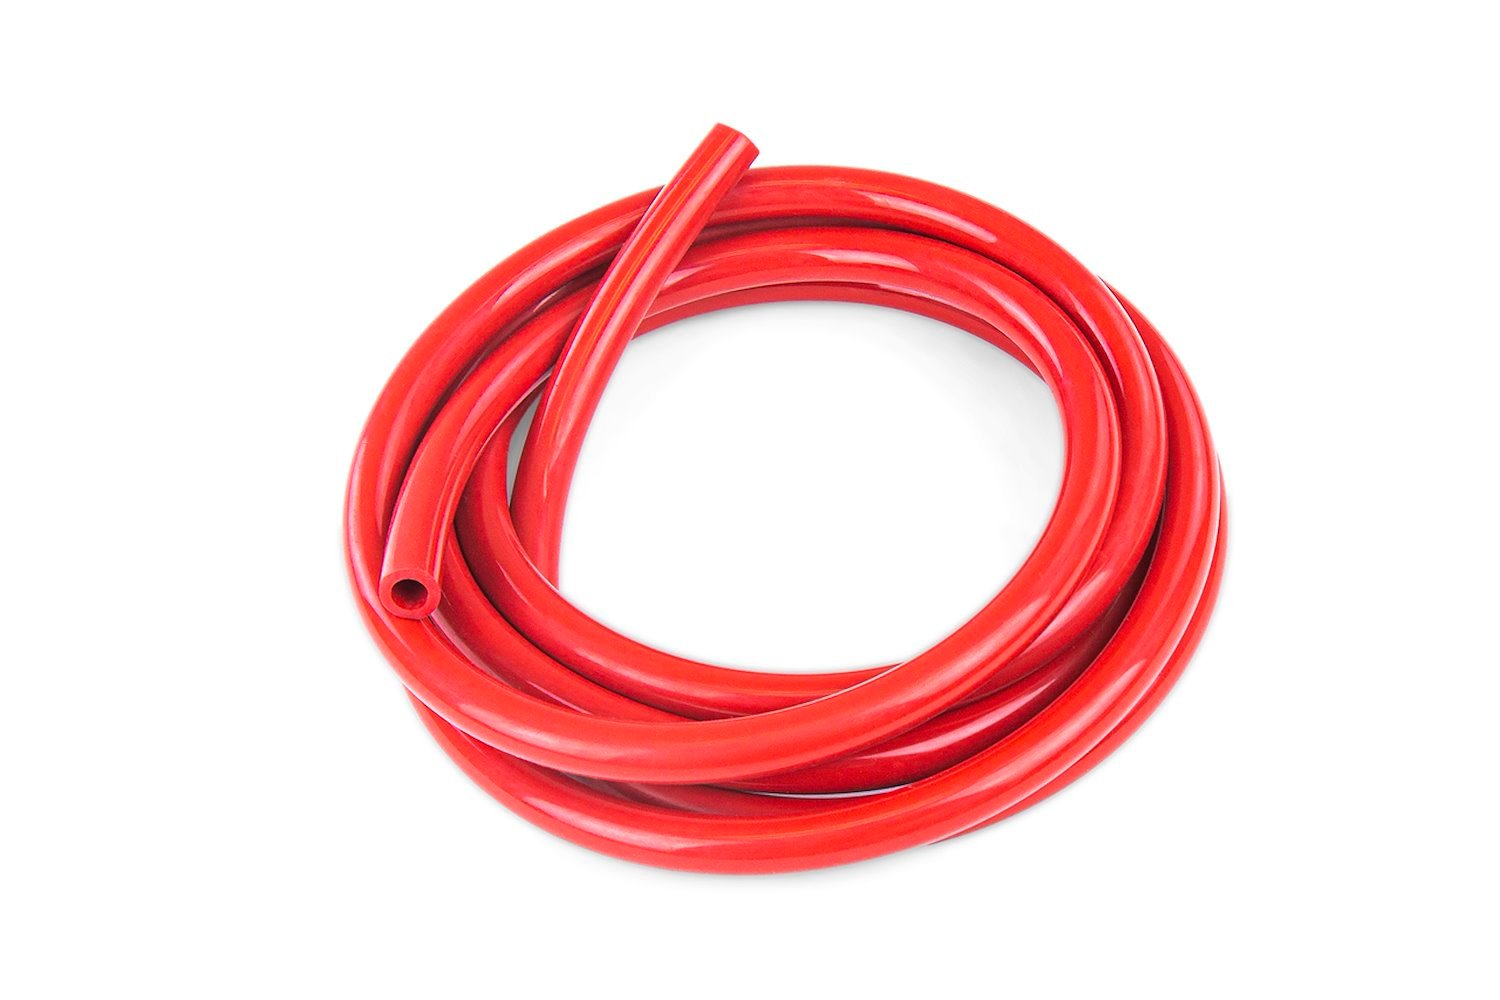 HTSVH3TW-REDx10 High-Temperature Silicone Vacuum Hose Tubing, 1/8 in. ID, 10 ft. Roll, Red